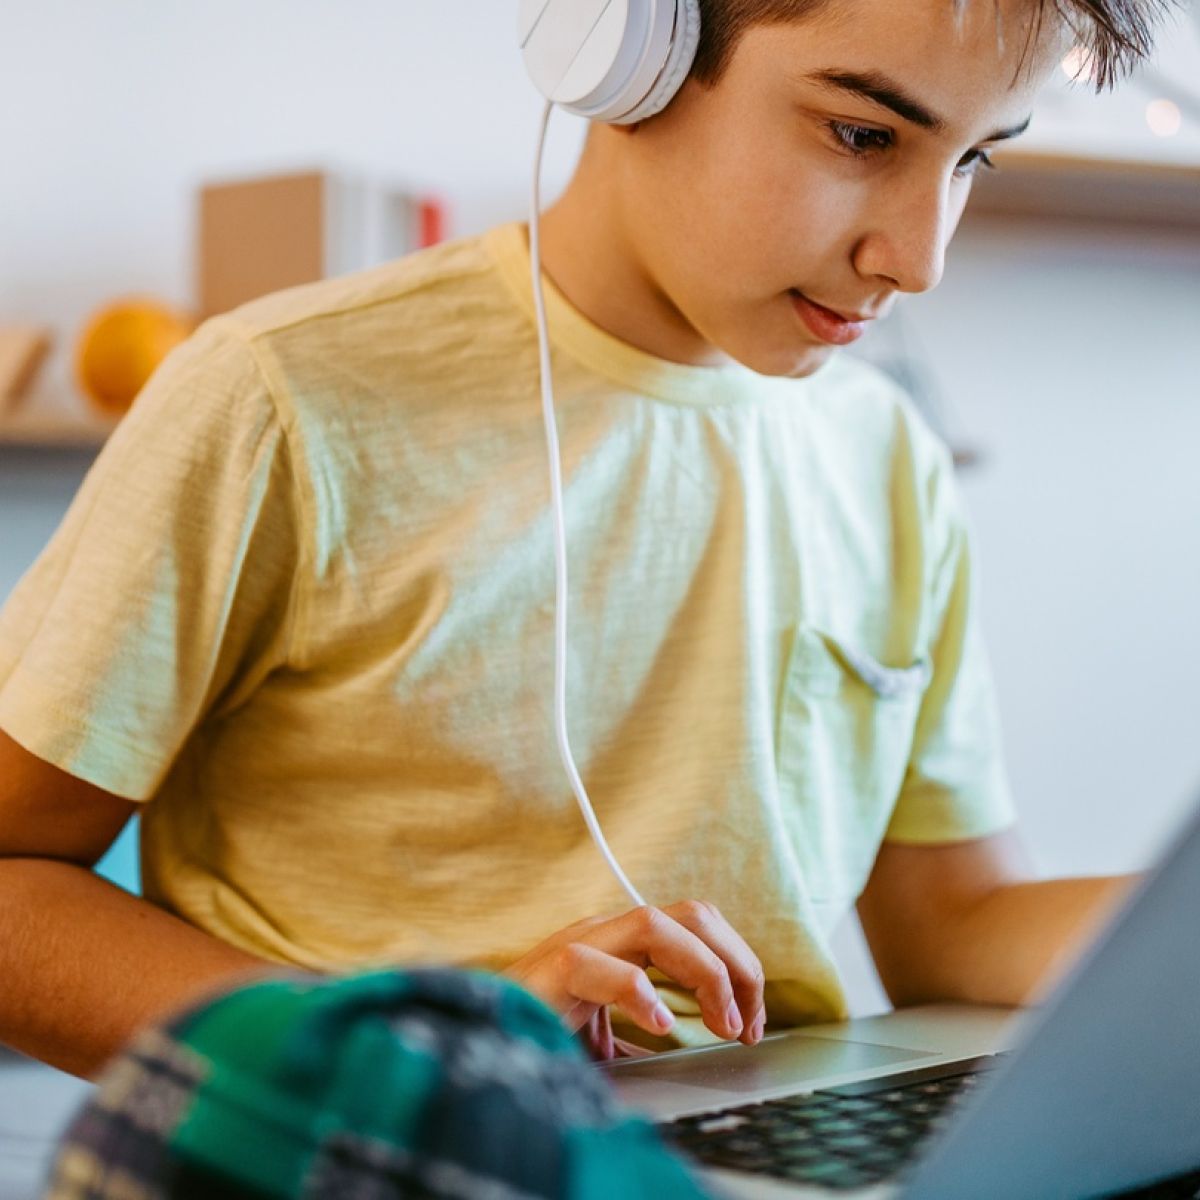 Under 16 Sex - My 12-year-old son is looking up porn. What should I do?'